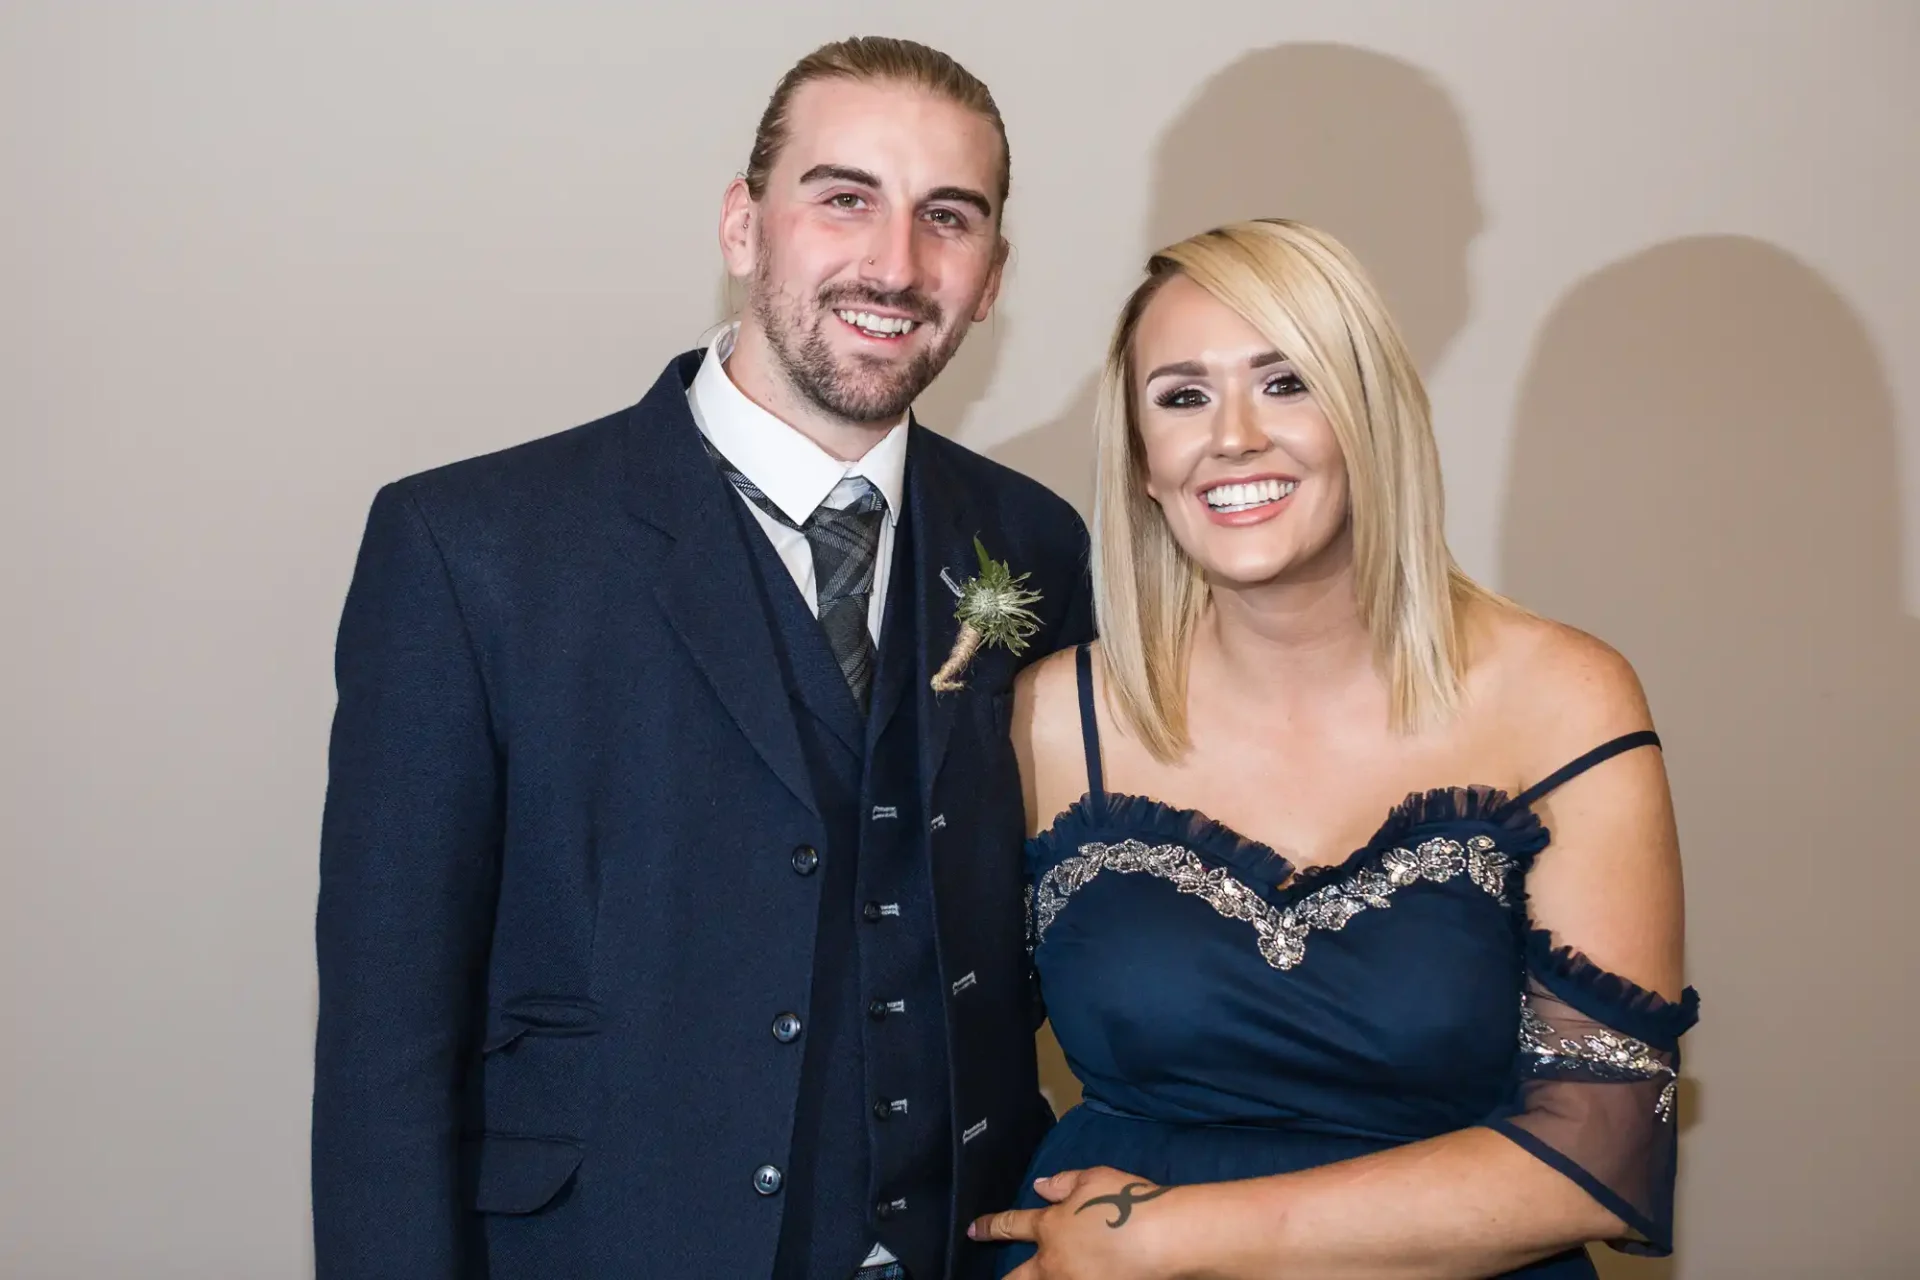 A man in a dark suit with a boutonniere and a woman in a navy blue dress with sequin details, smiling and standing together against a beige wall.